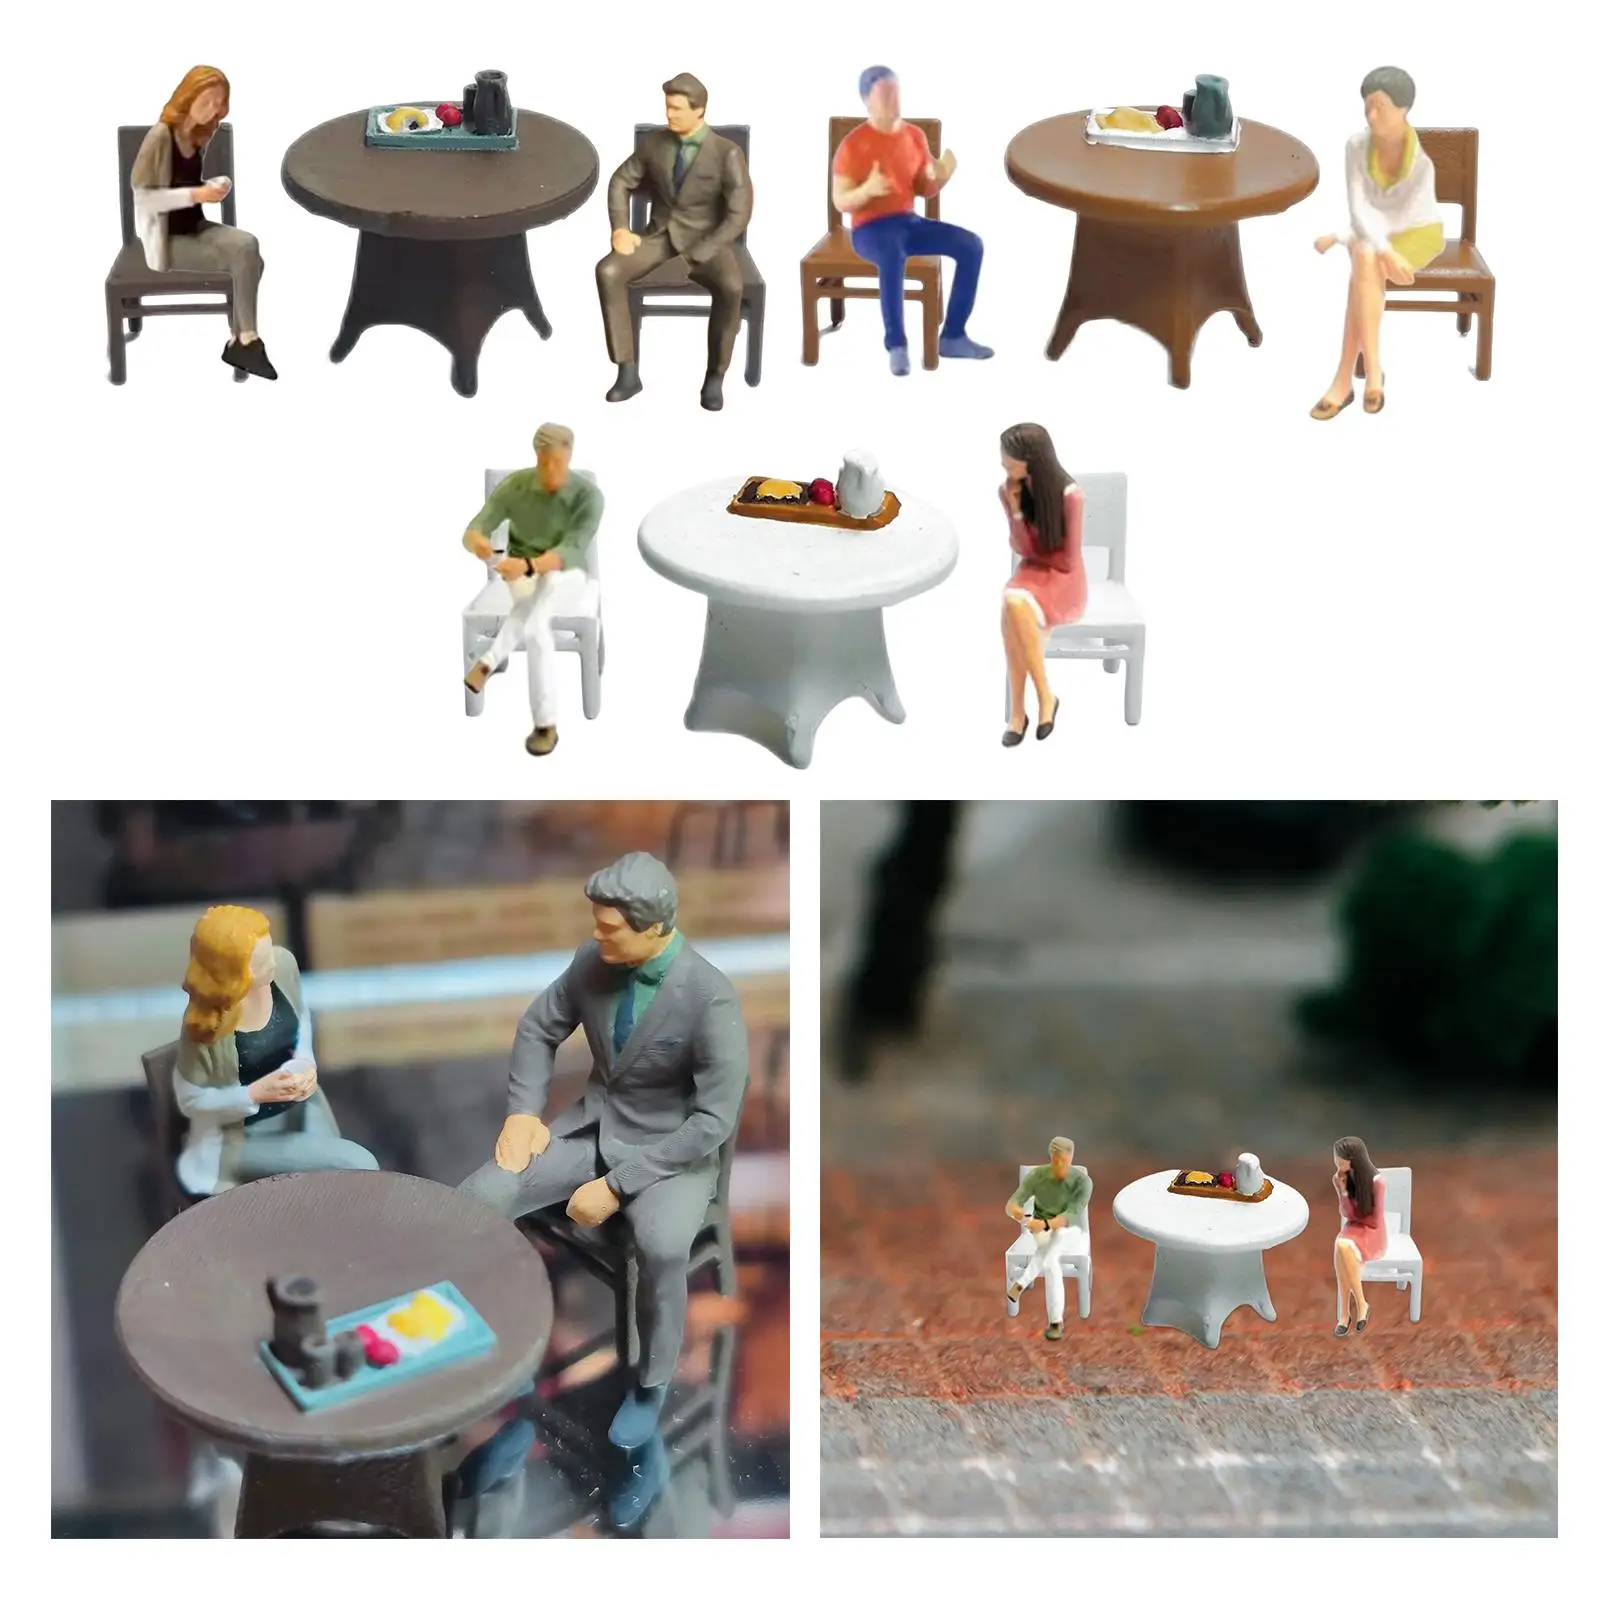 Resin 1/64 Couple Model Figure Collectibles Sand Table Ornament Model Trains People Figures for DIY Scene Dollhouse Layout Decor